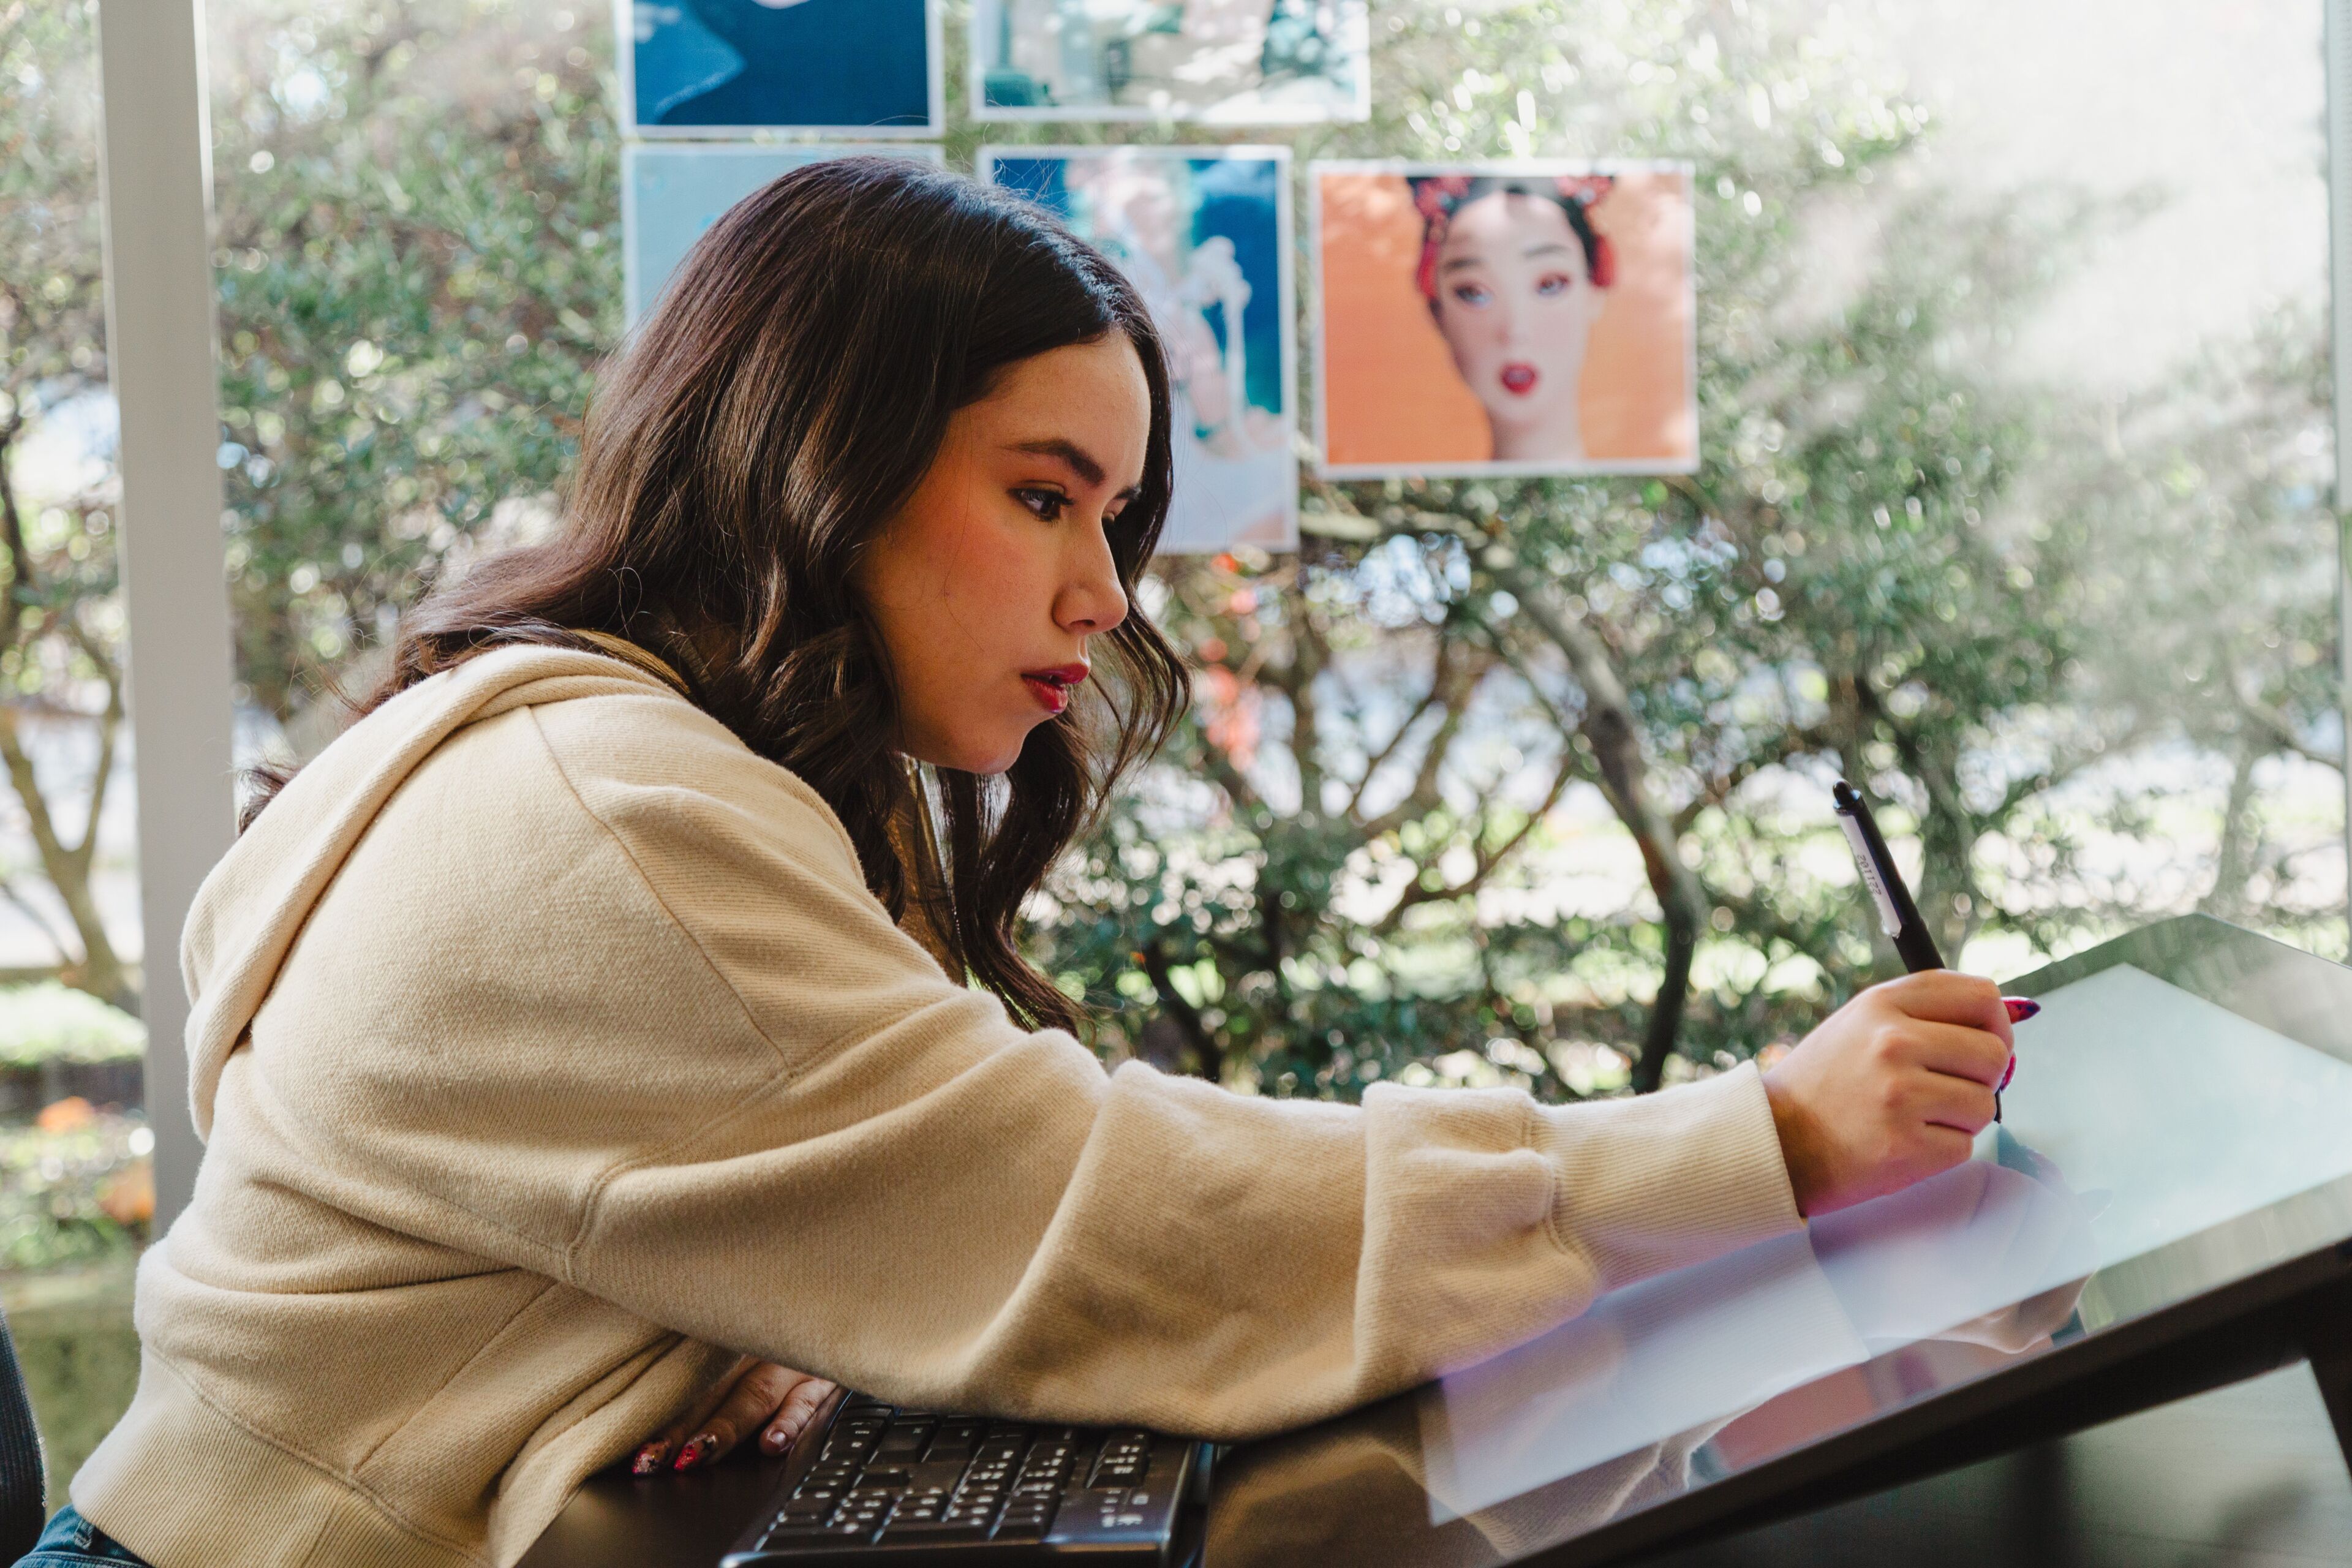 A focused artist sketches on a digital tablet by a window with inspiration images.